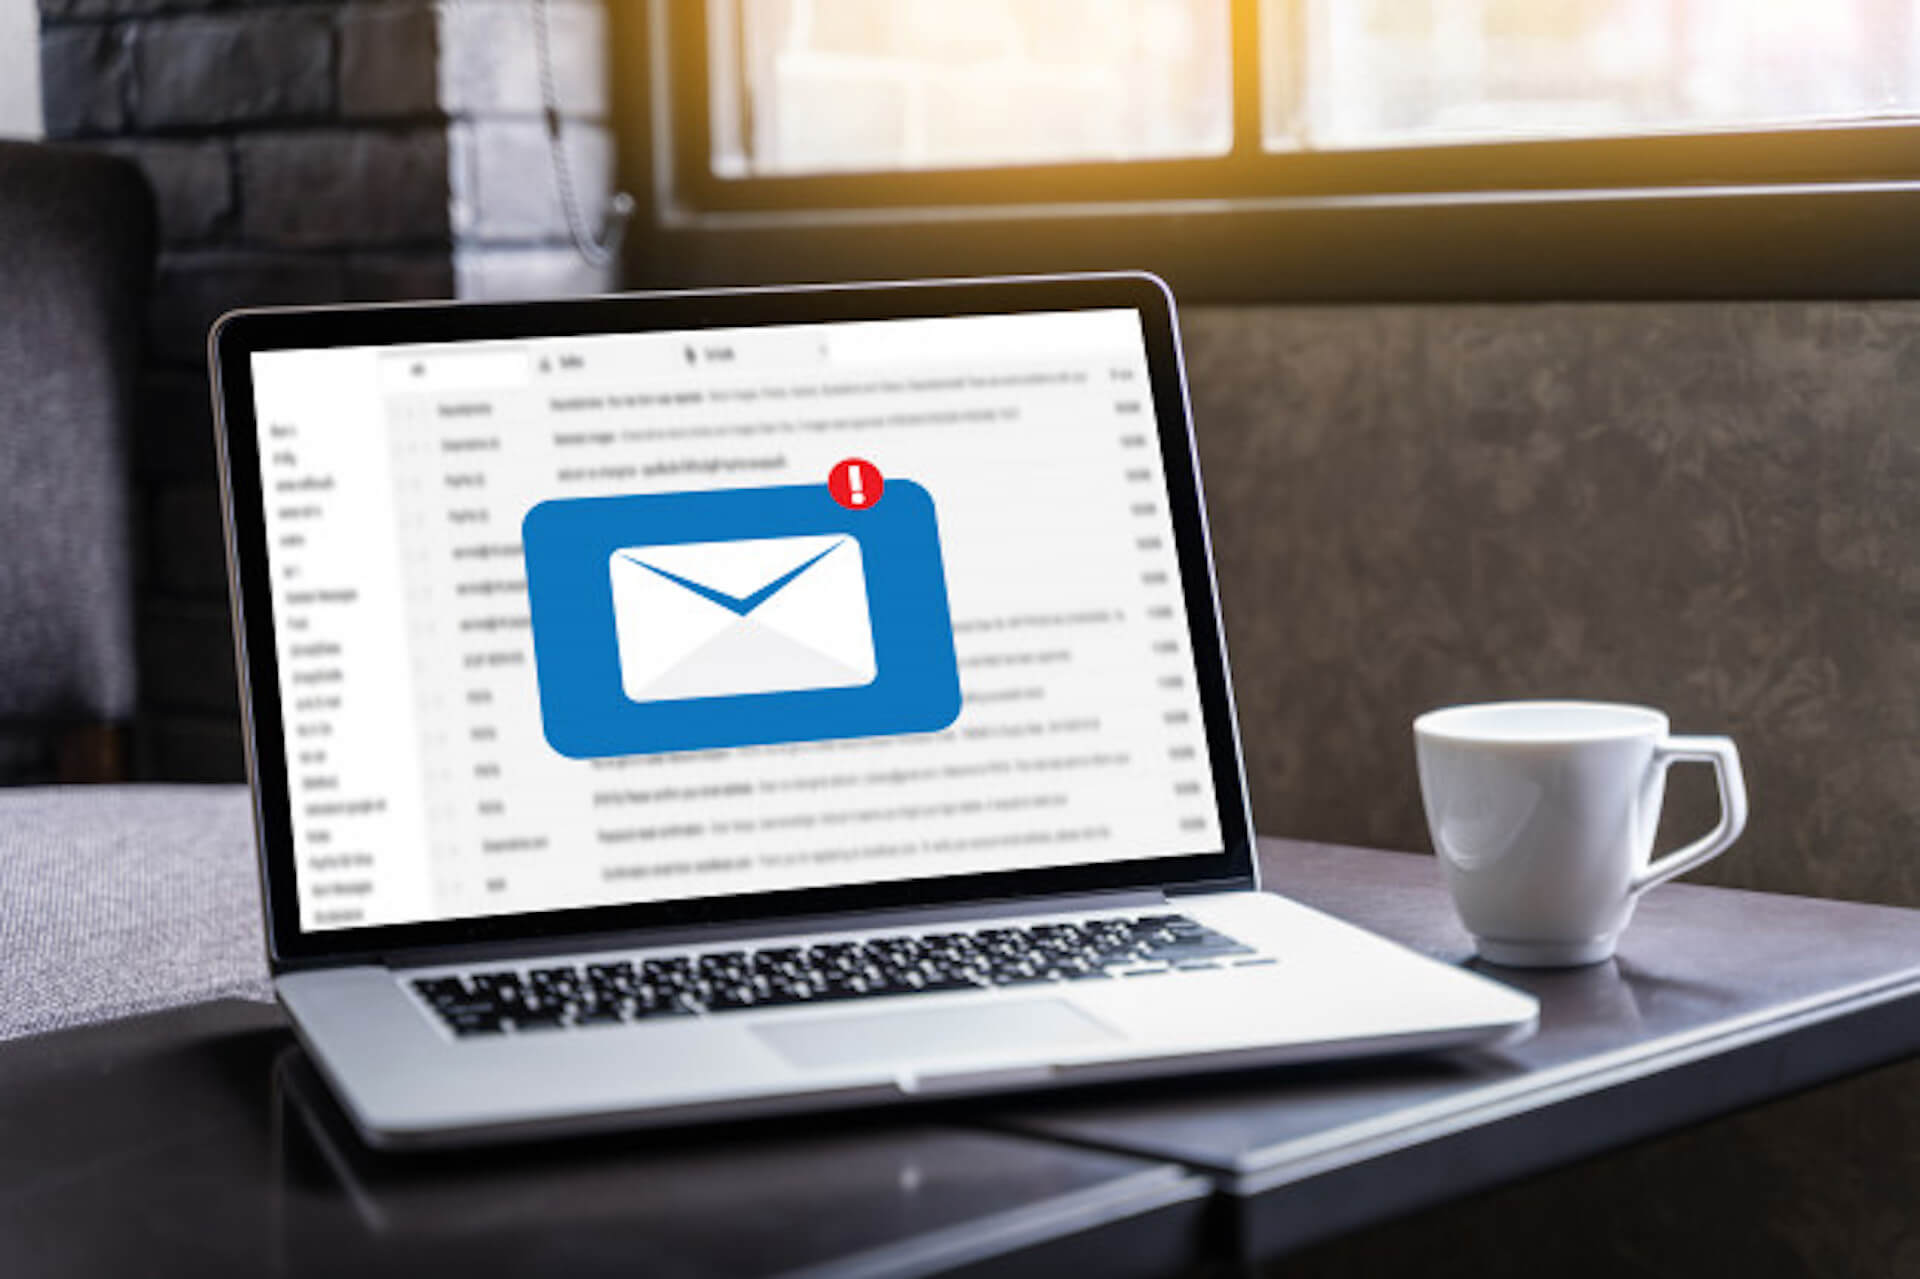 Report: Email engagement benefits from less send frequency, subject line keywords